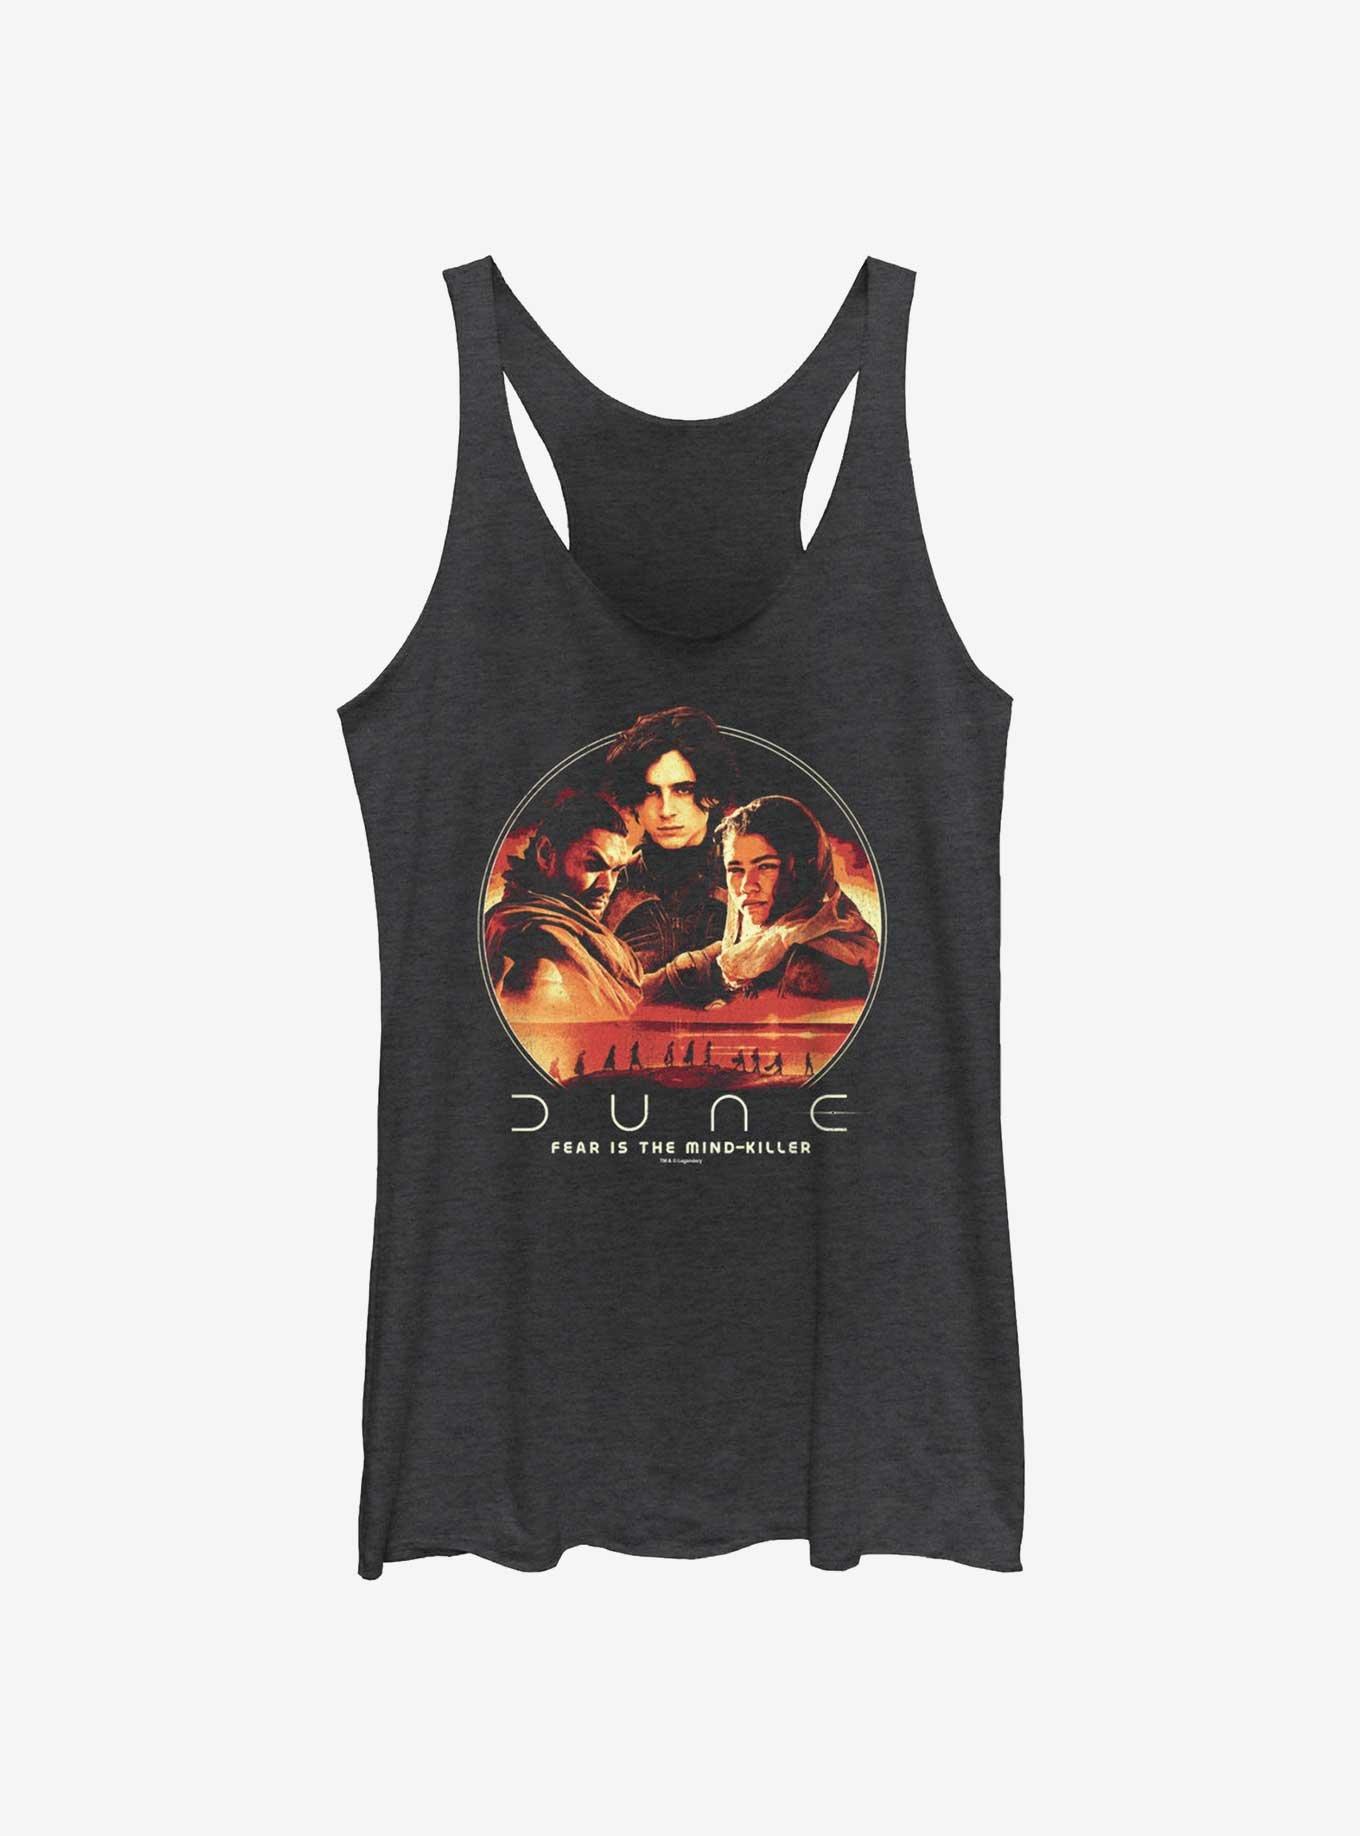 Dune: Part Two Fear Is The Mind-Killer Womens Tank Top, BLK HTR, hi-res